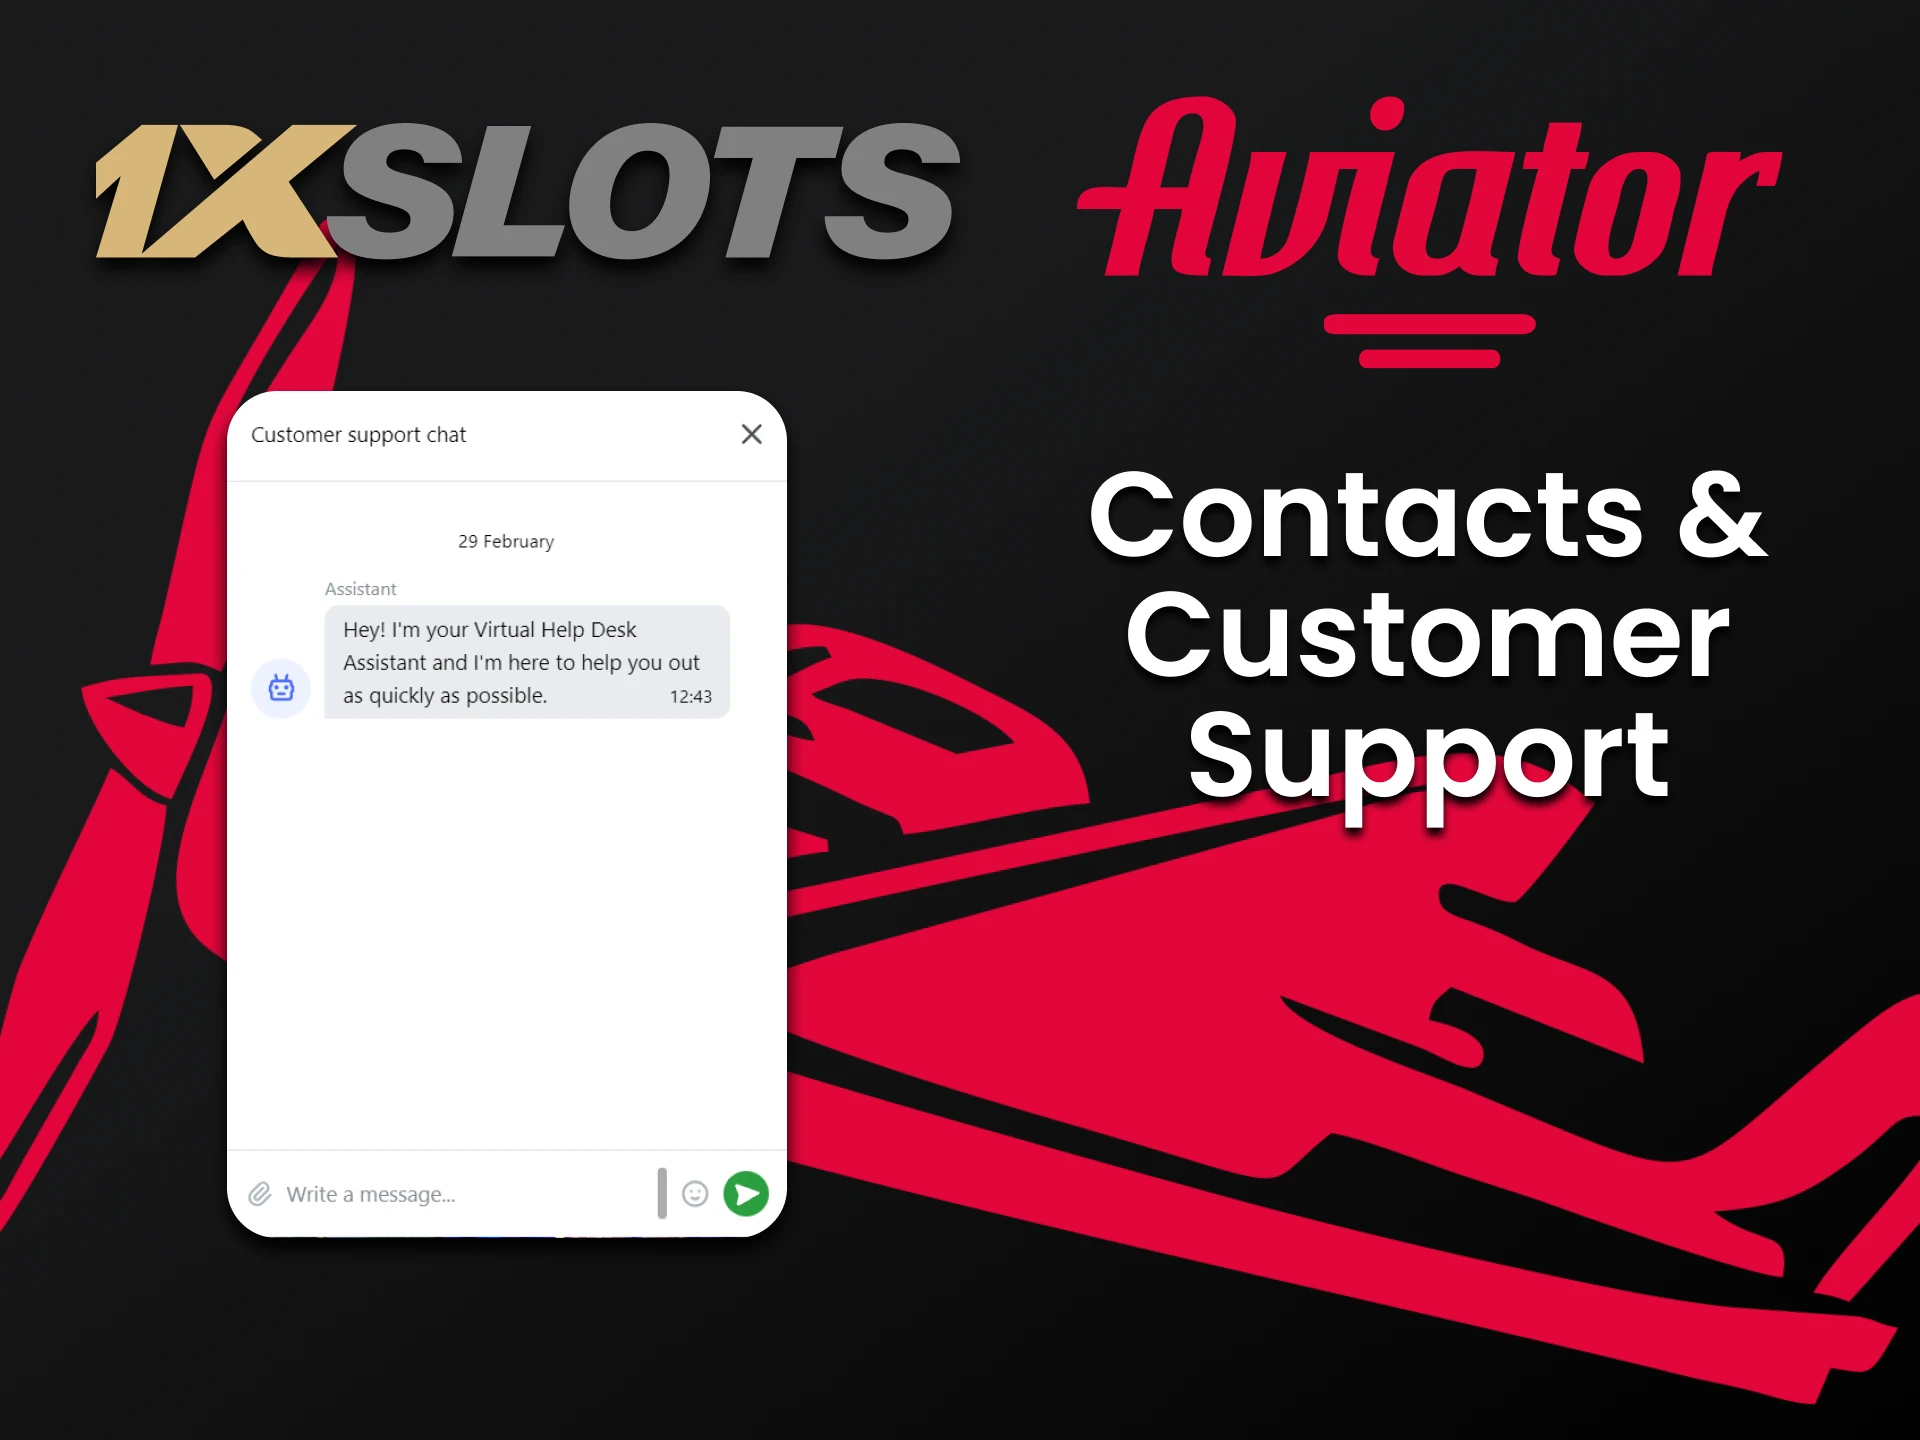 The 1xslots website has a live chat to support Aviator players.